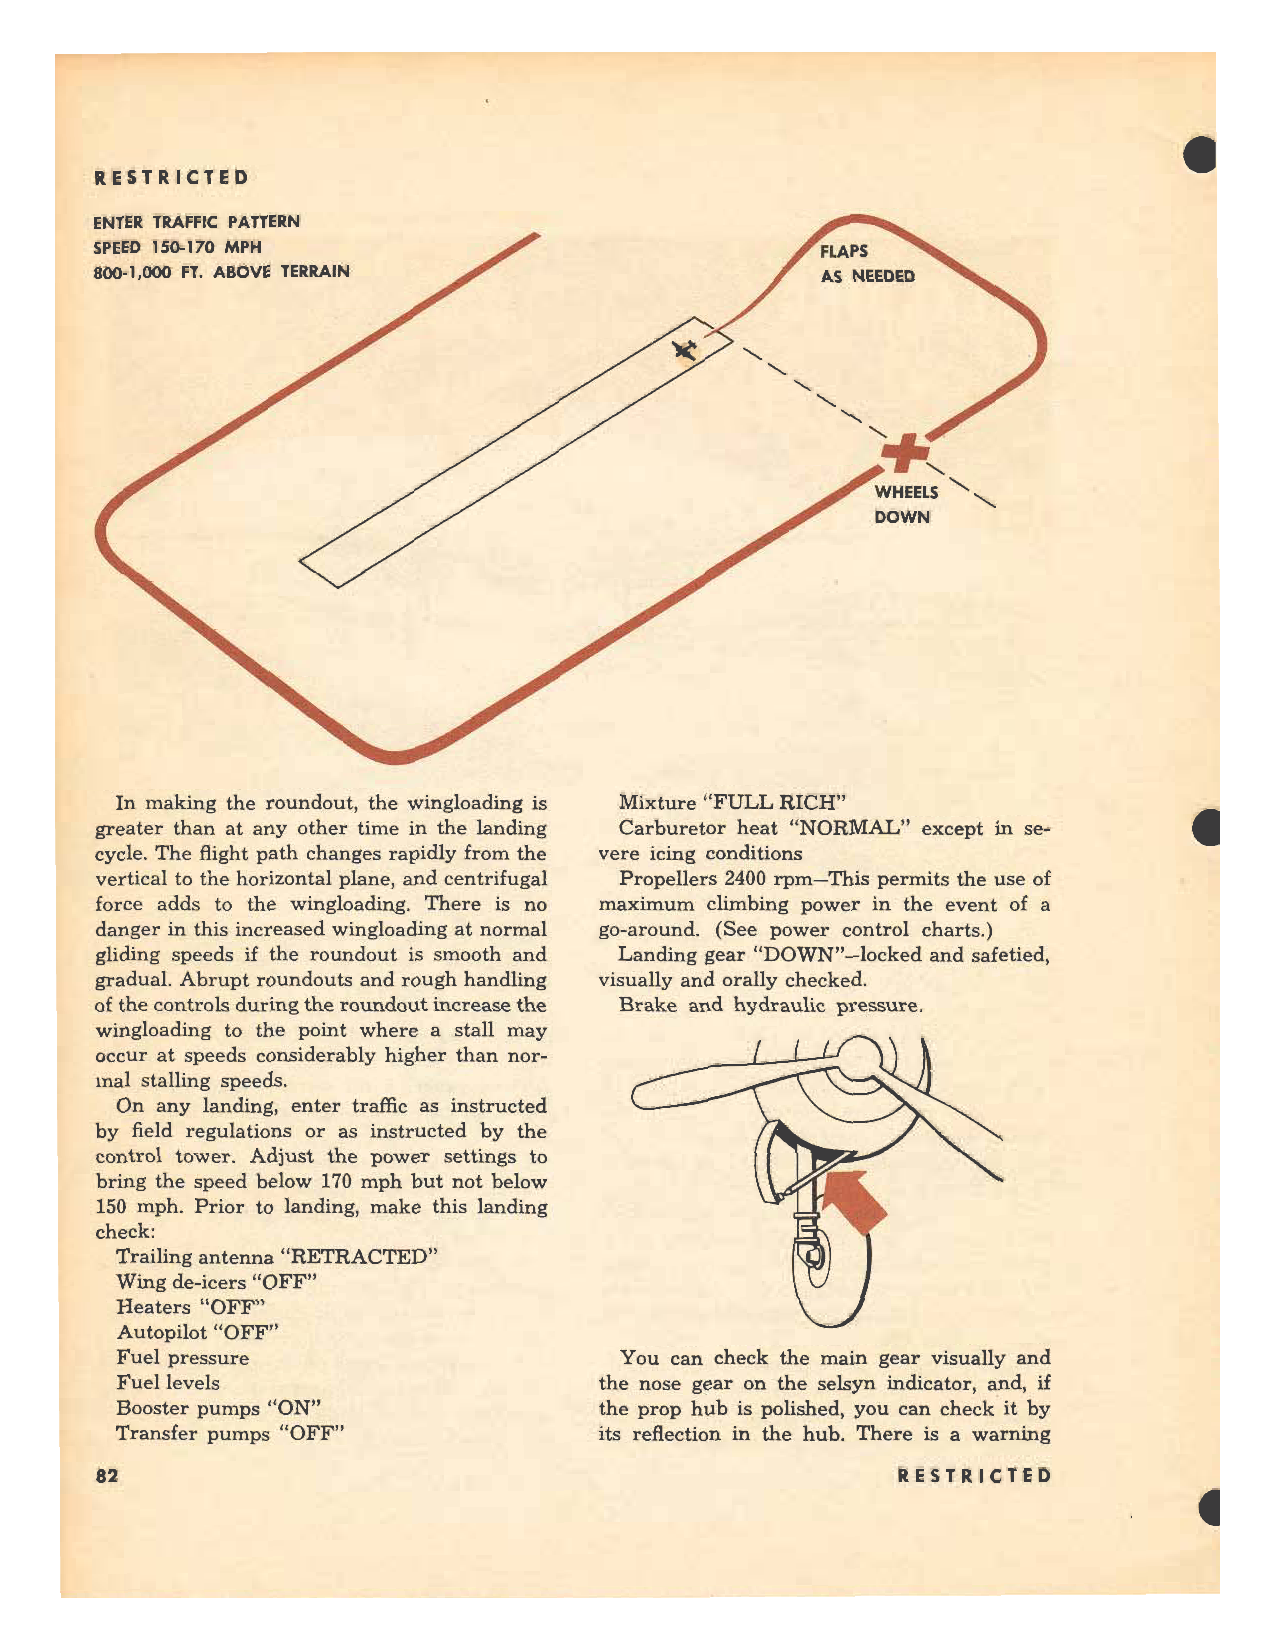 Sample page 82 from AirCorps Library document: Pilot Training Manual - B-25